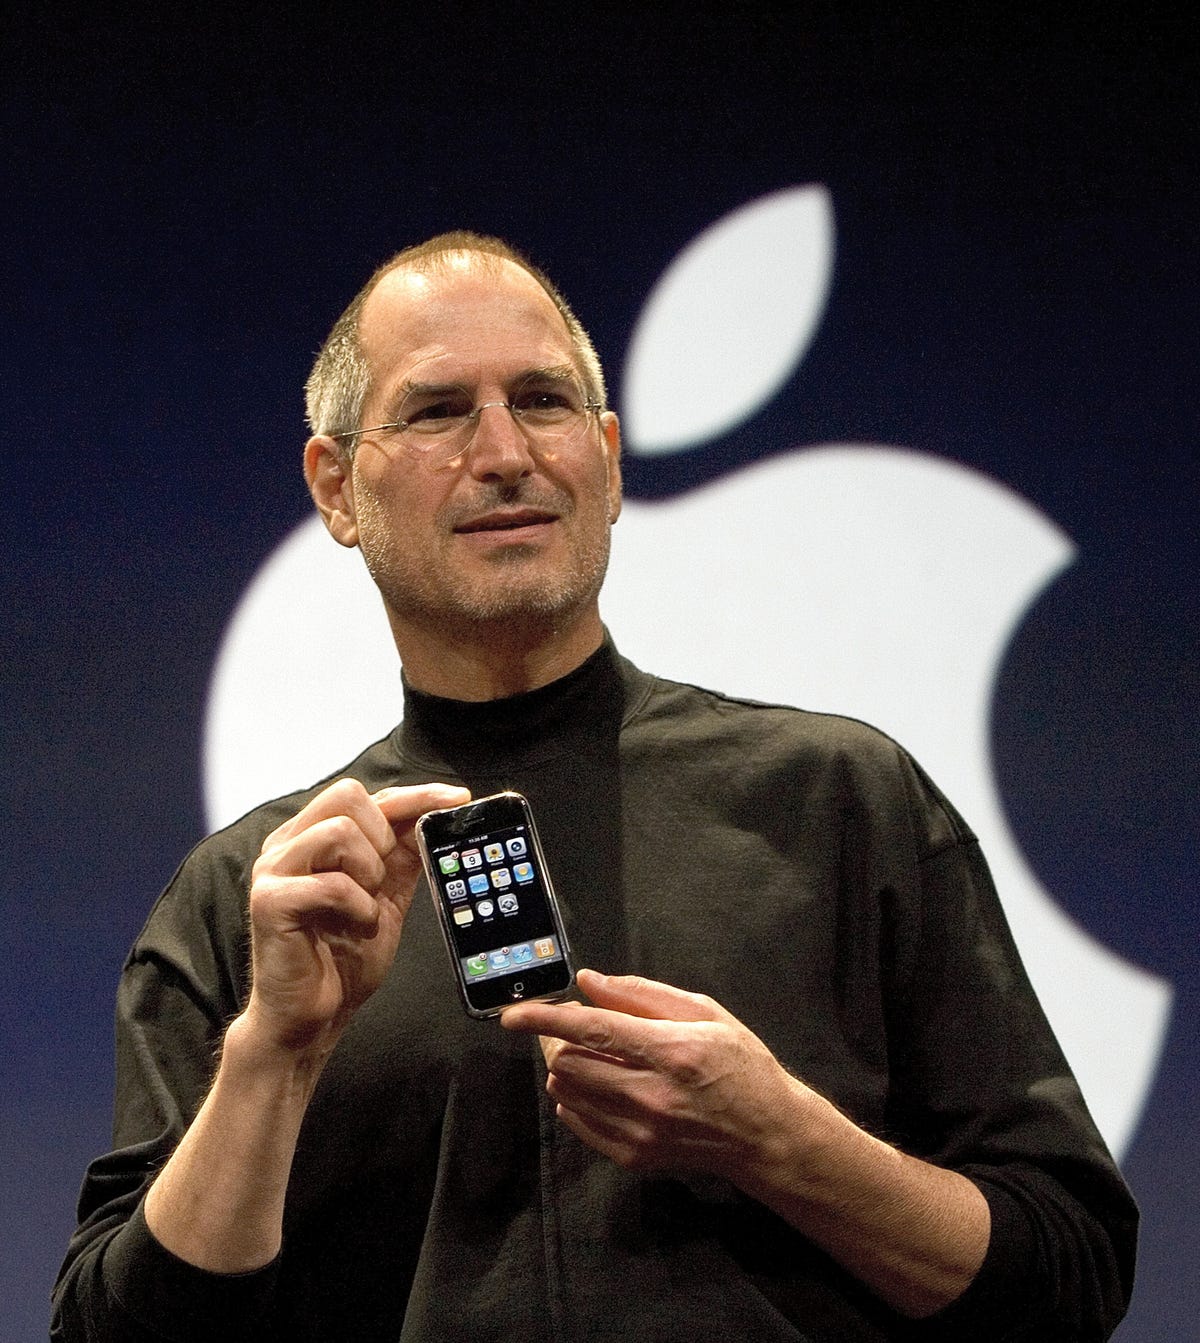 Steve Jobs Knew iPhone Would Be Iconic. More Than 2 Billion